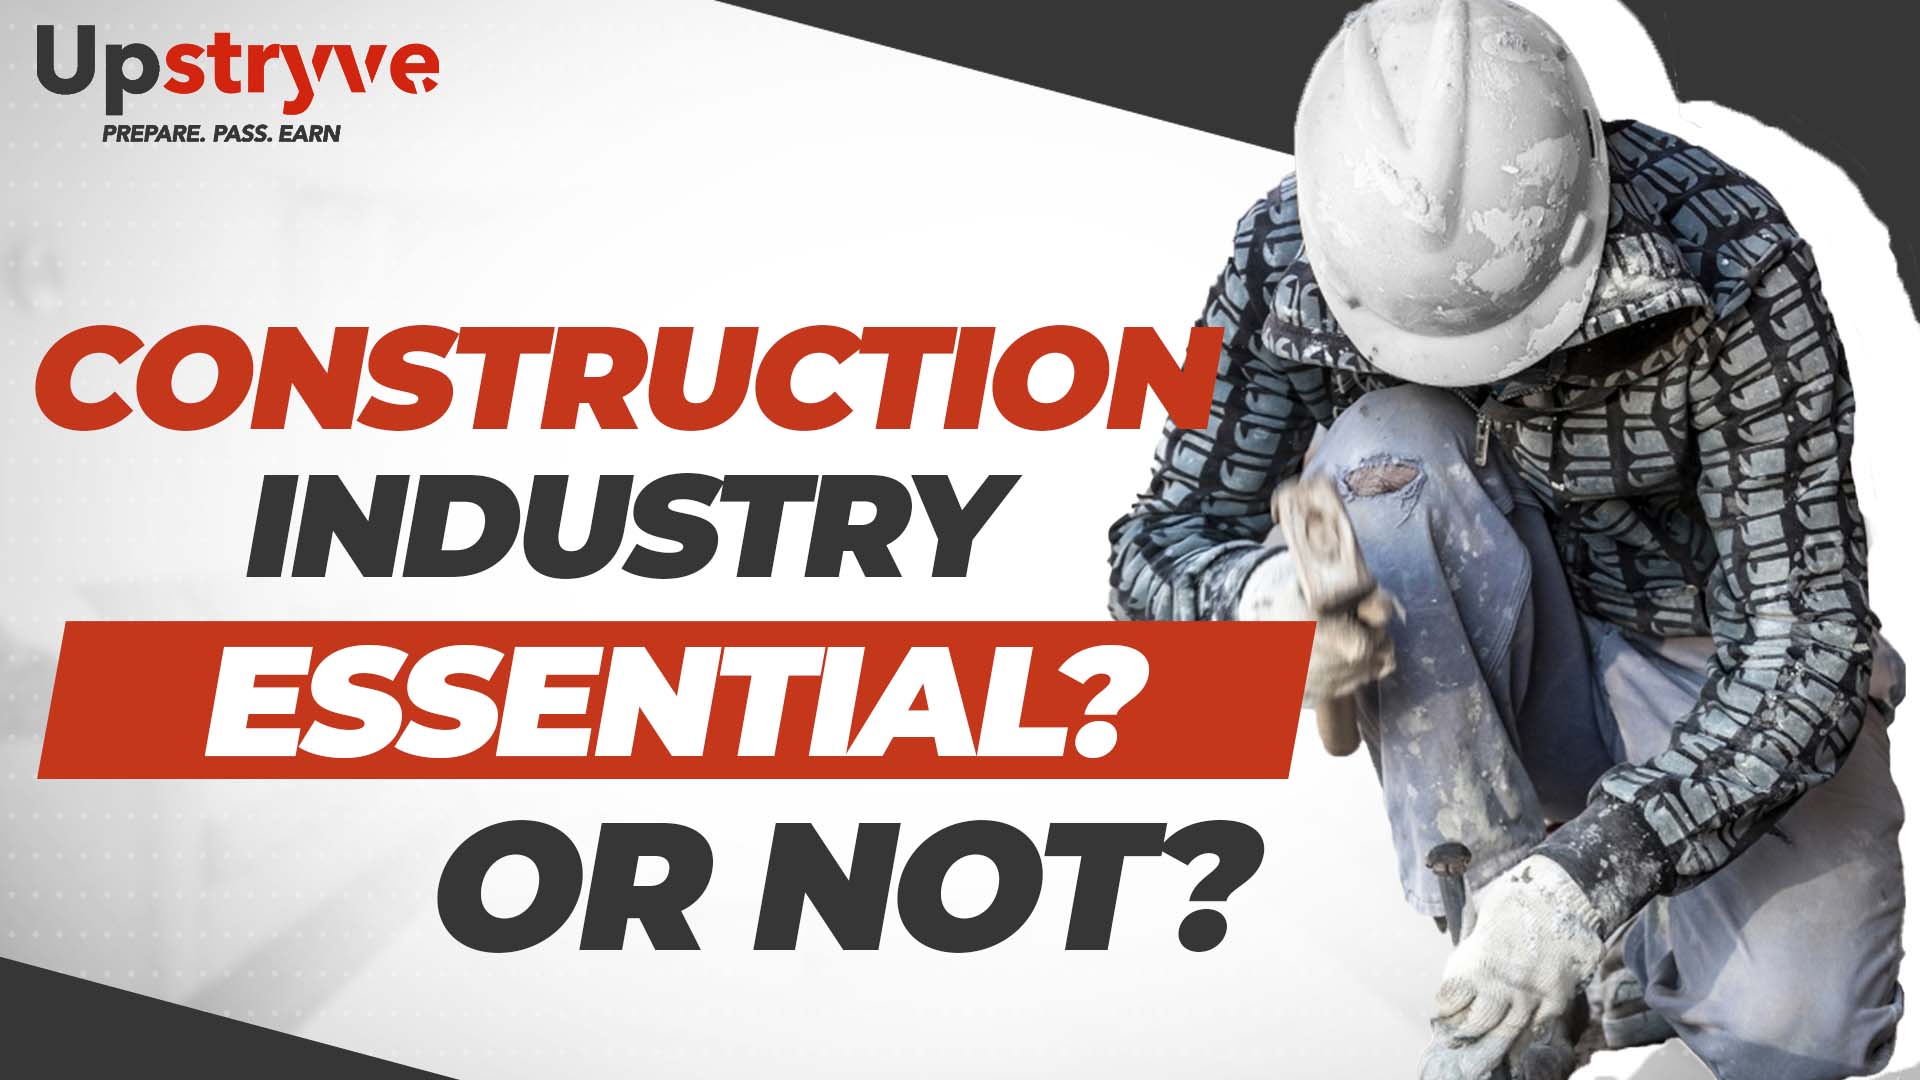 Call us today: 877-938-1888. Why is construction an essential service? This is a question many people asked in early 2020. Construction is essential for many reasons which Upstryve tutor and industry expert Hugo Villegas discusses in today's video. He explains how construction creates a greater multiplier effect than any industry. This creates a solid infrastructure and economy.

You may be asking yourself what is the multiplier effect and how does it apply to construction? Well the multiplier effect broadly refers to an economic factor that, when increased or changed, causes increases or changes in many other related economic variables. In terms of gross domestic product, the multiplier effect causes gains in total output to be greater than the change in spending that caused it.